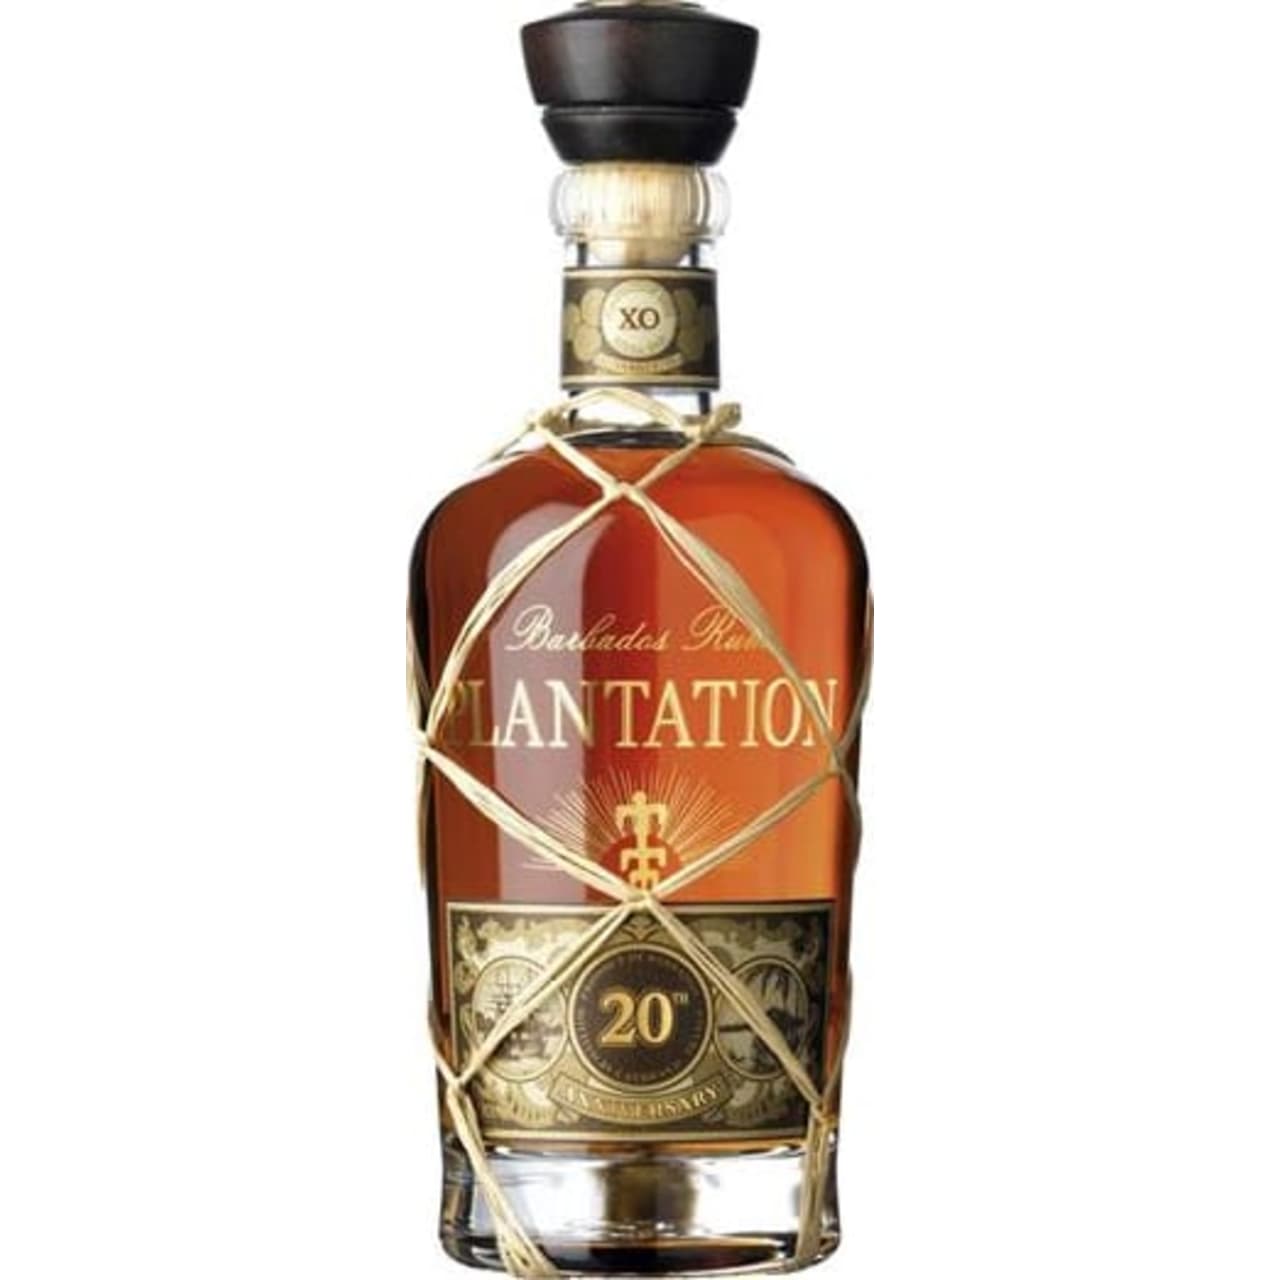 The colour of old mahogany, Plantation XO 20th Anniversary reveals a nose with exotic notes of sugarcane, oaky vanilla and toasted coconut, enhanced by more complex aromas of cocoa, candied orange and cigar box.